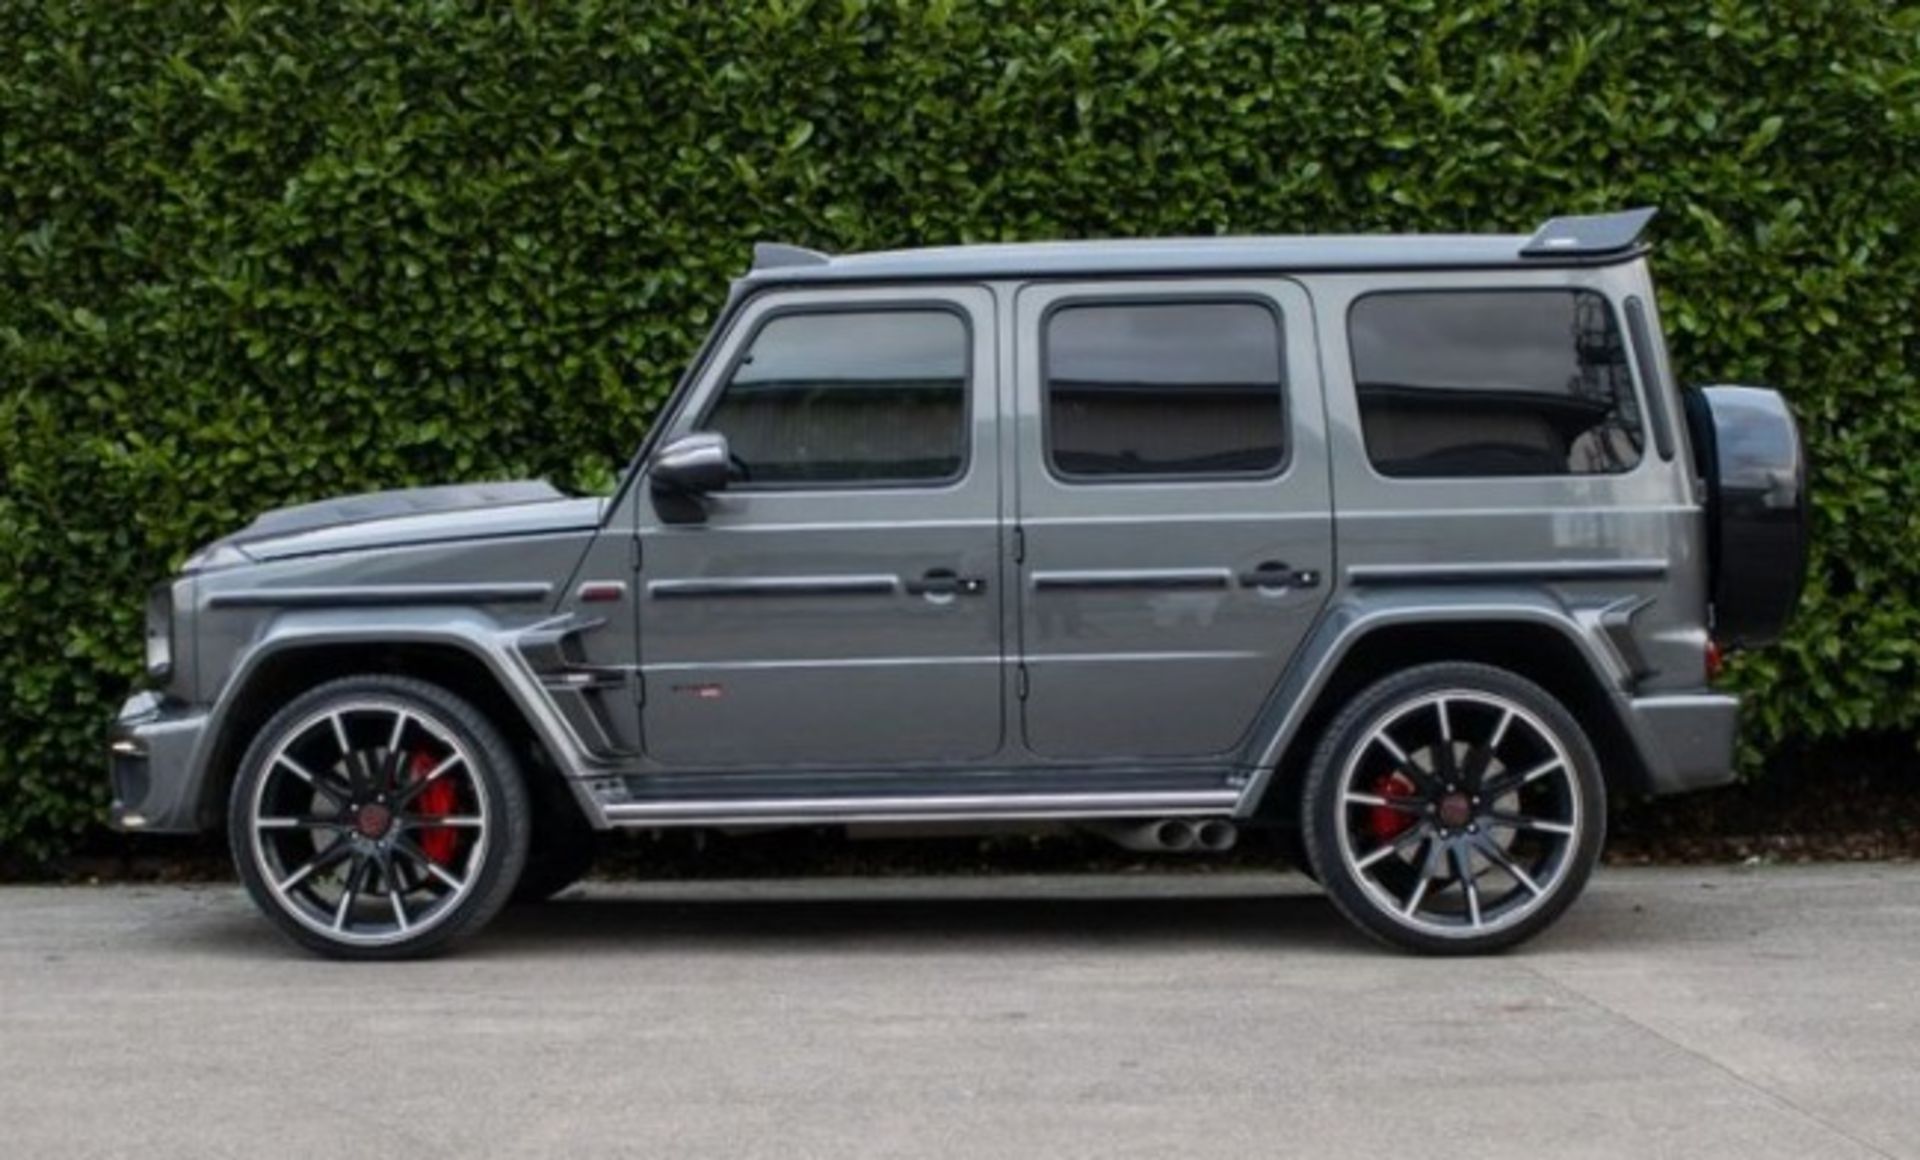 MERCEDES G63 BRABUS WIDE-STAR 800 STYLING GREY WITH BLACK LEATHER INTERIOR - Image 2 of 27